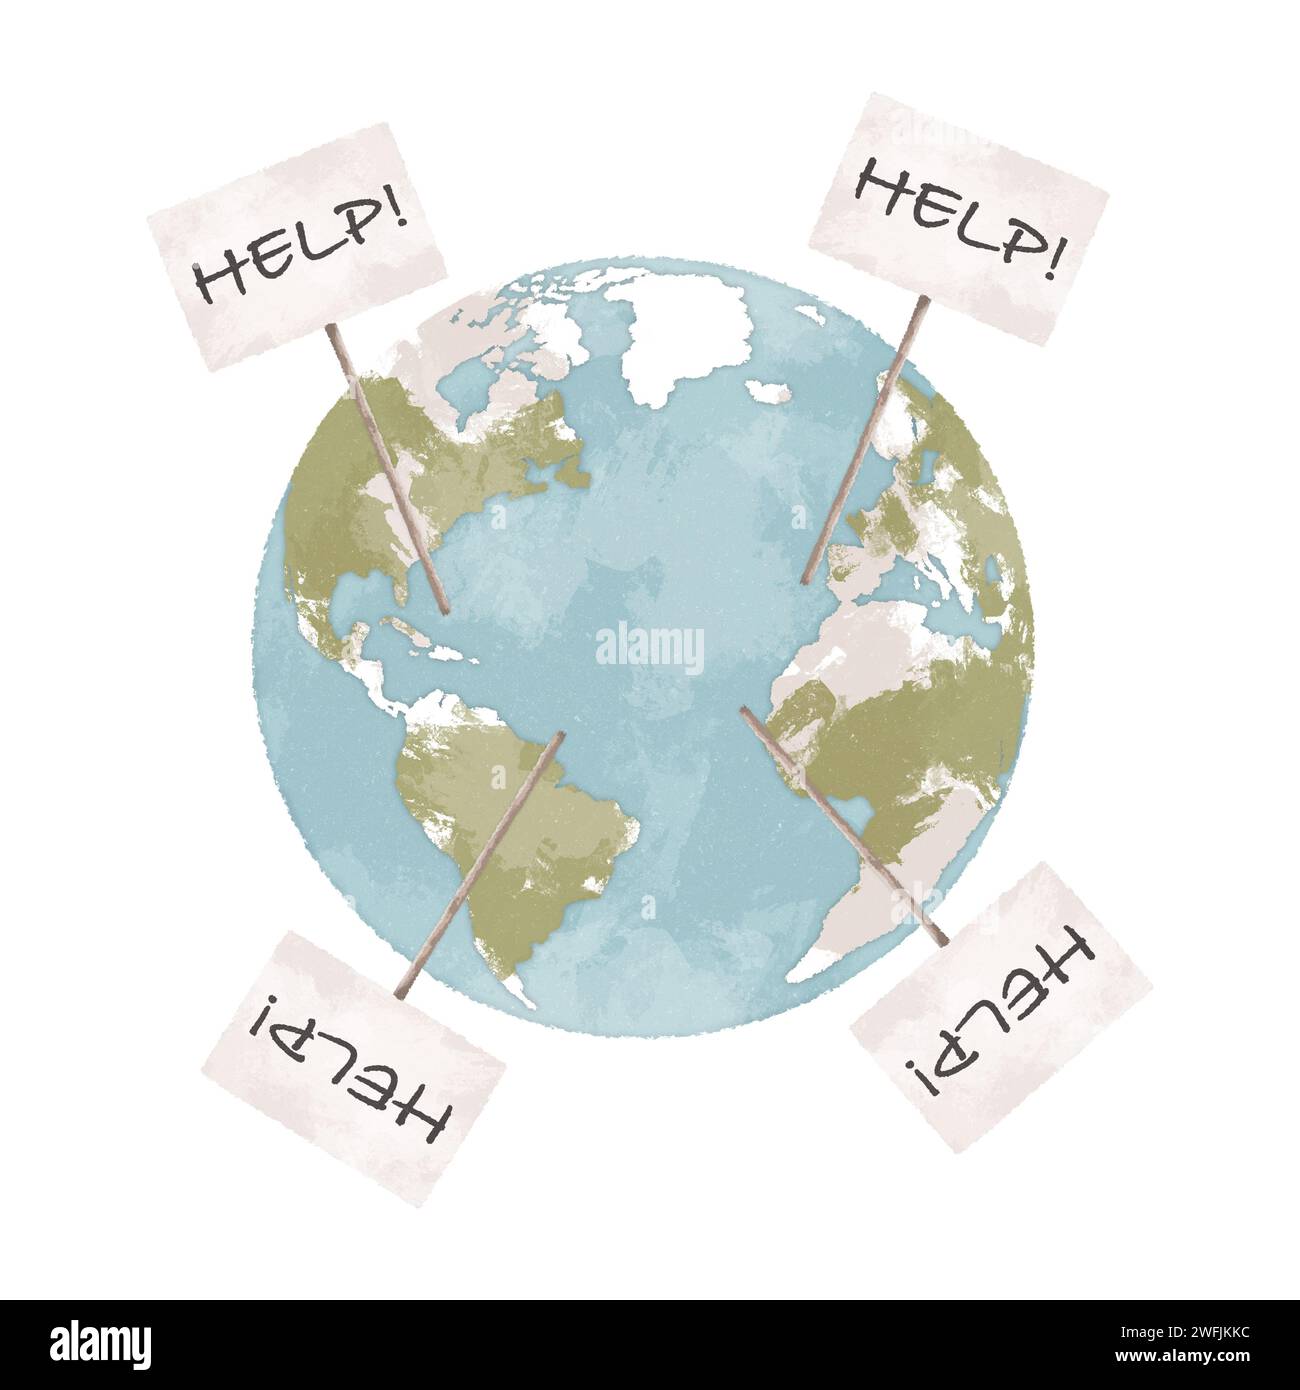 Planet Earth with help sign hand drawn illustration. Climate change concept. Stock Photo